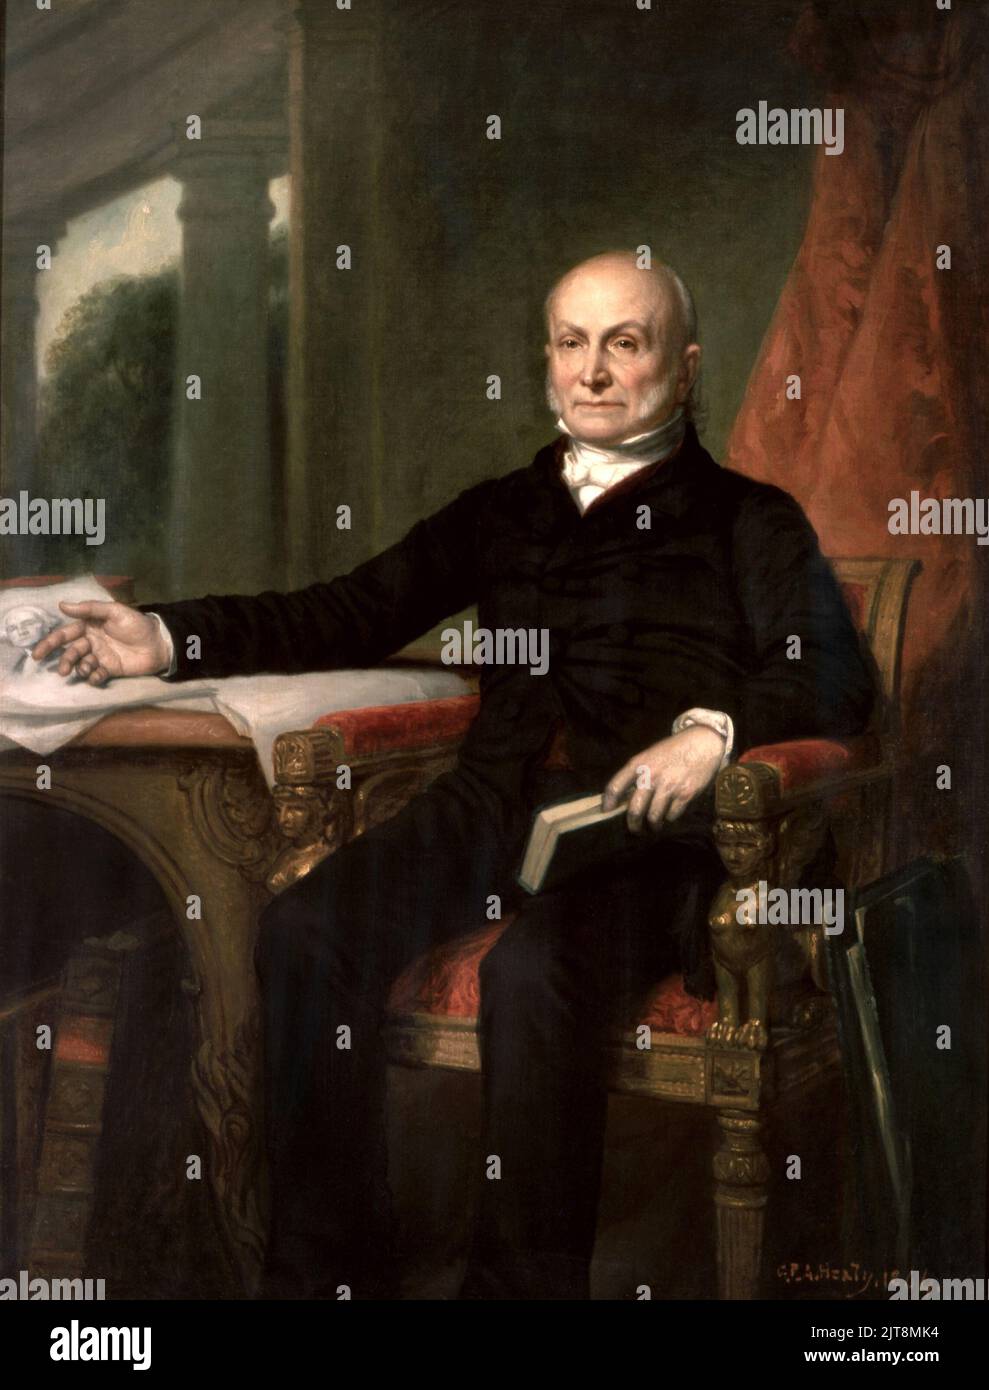 A portrait of John Quincy Adams, sixth president of the USA.  The painting is by George Peter Alexander Healy, c. 1858. Stock Photo